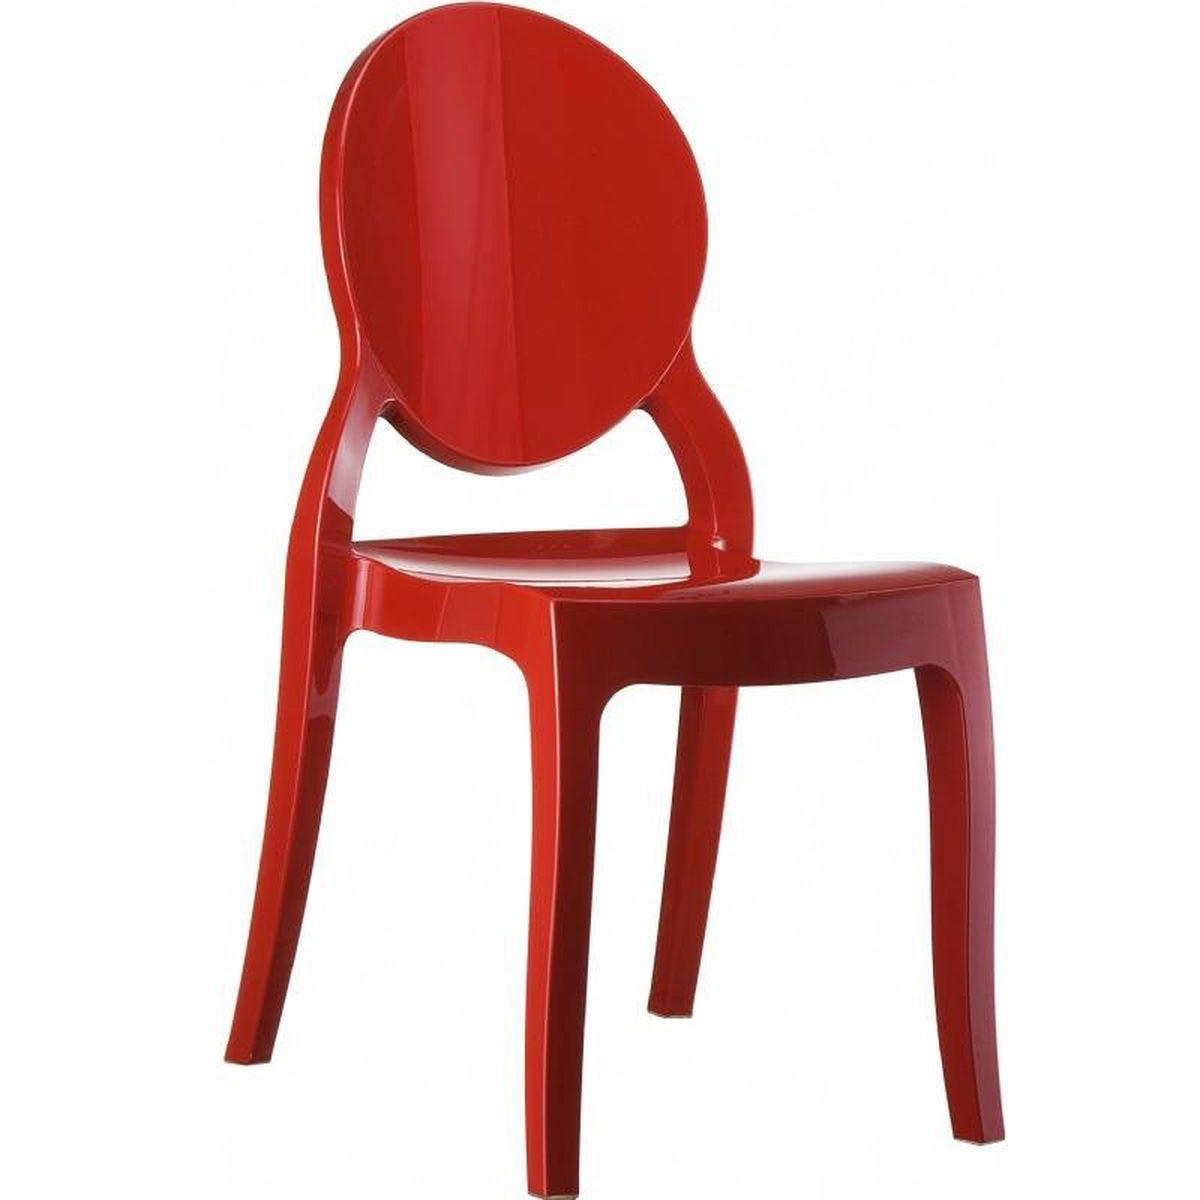 Glossy Red Oval Logo - Red Stacking Dining Chair ISP034 GRED